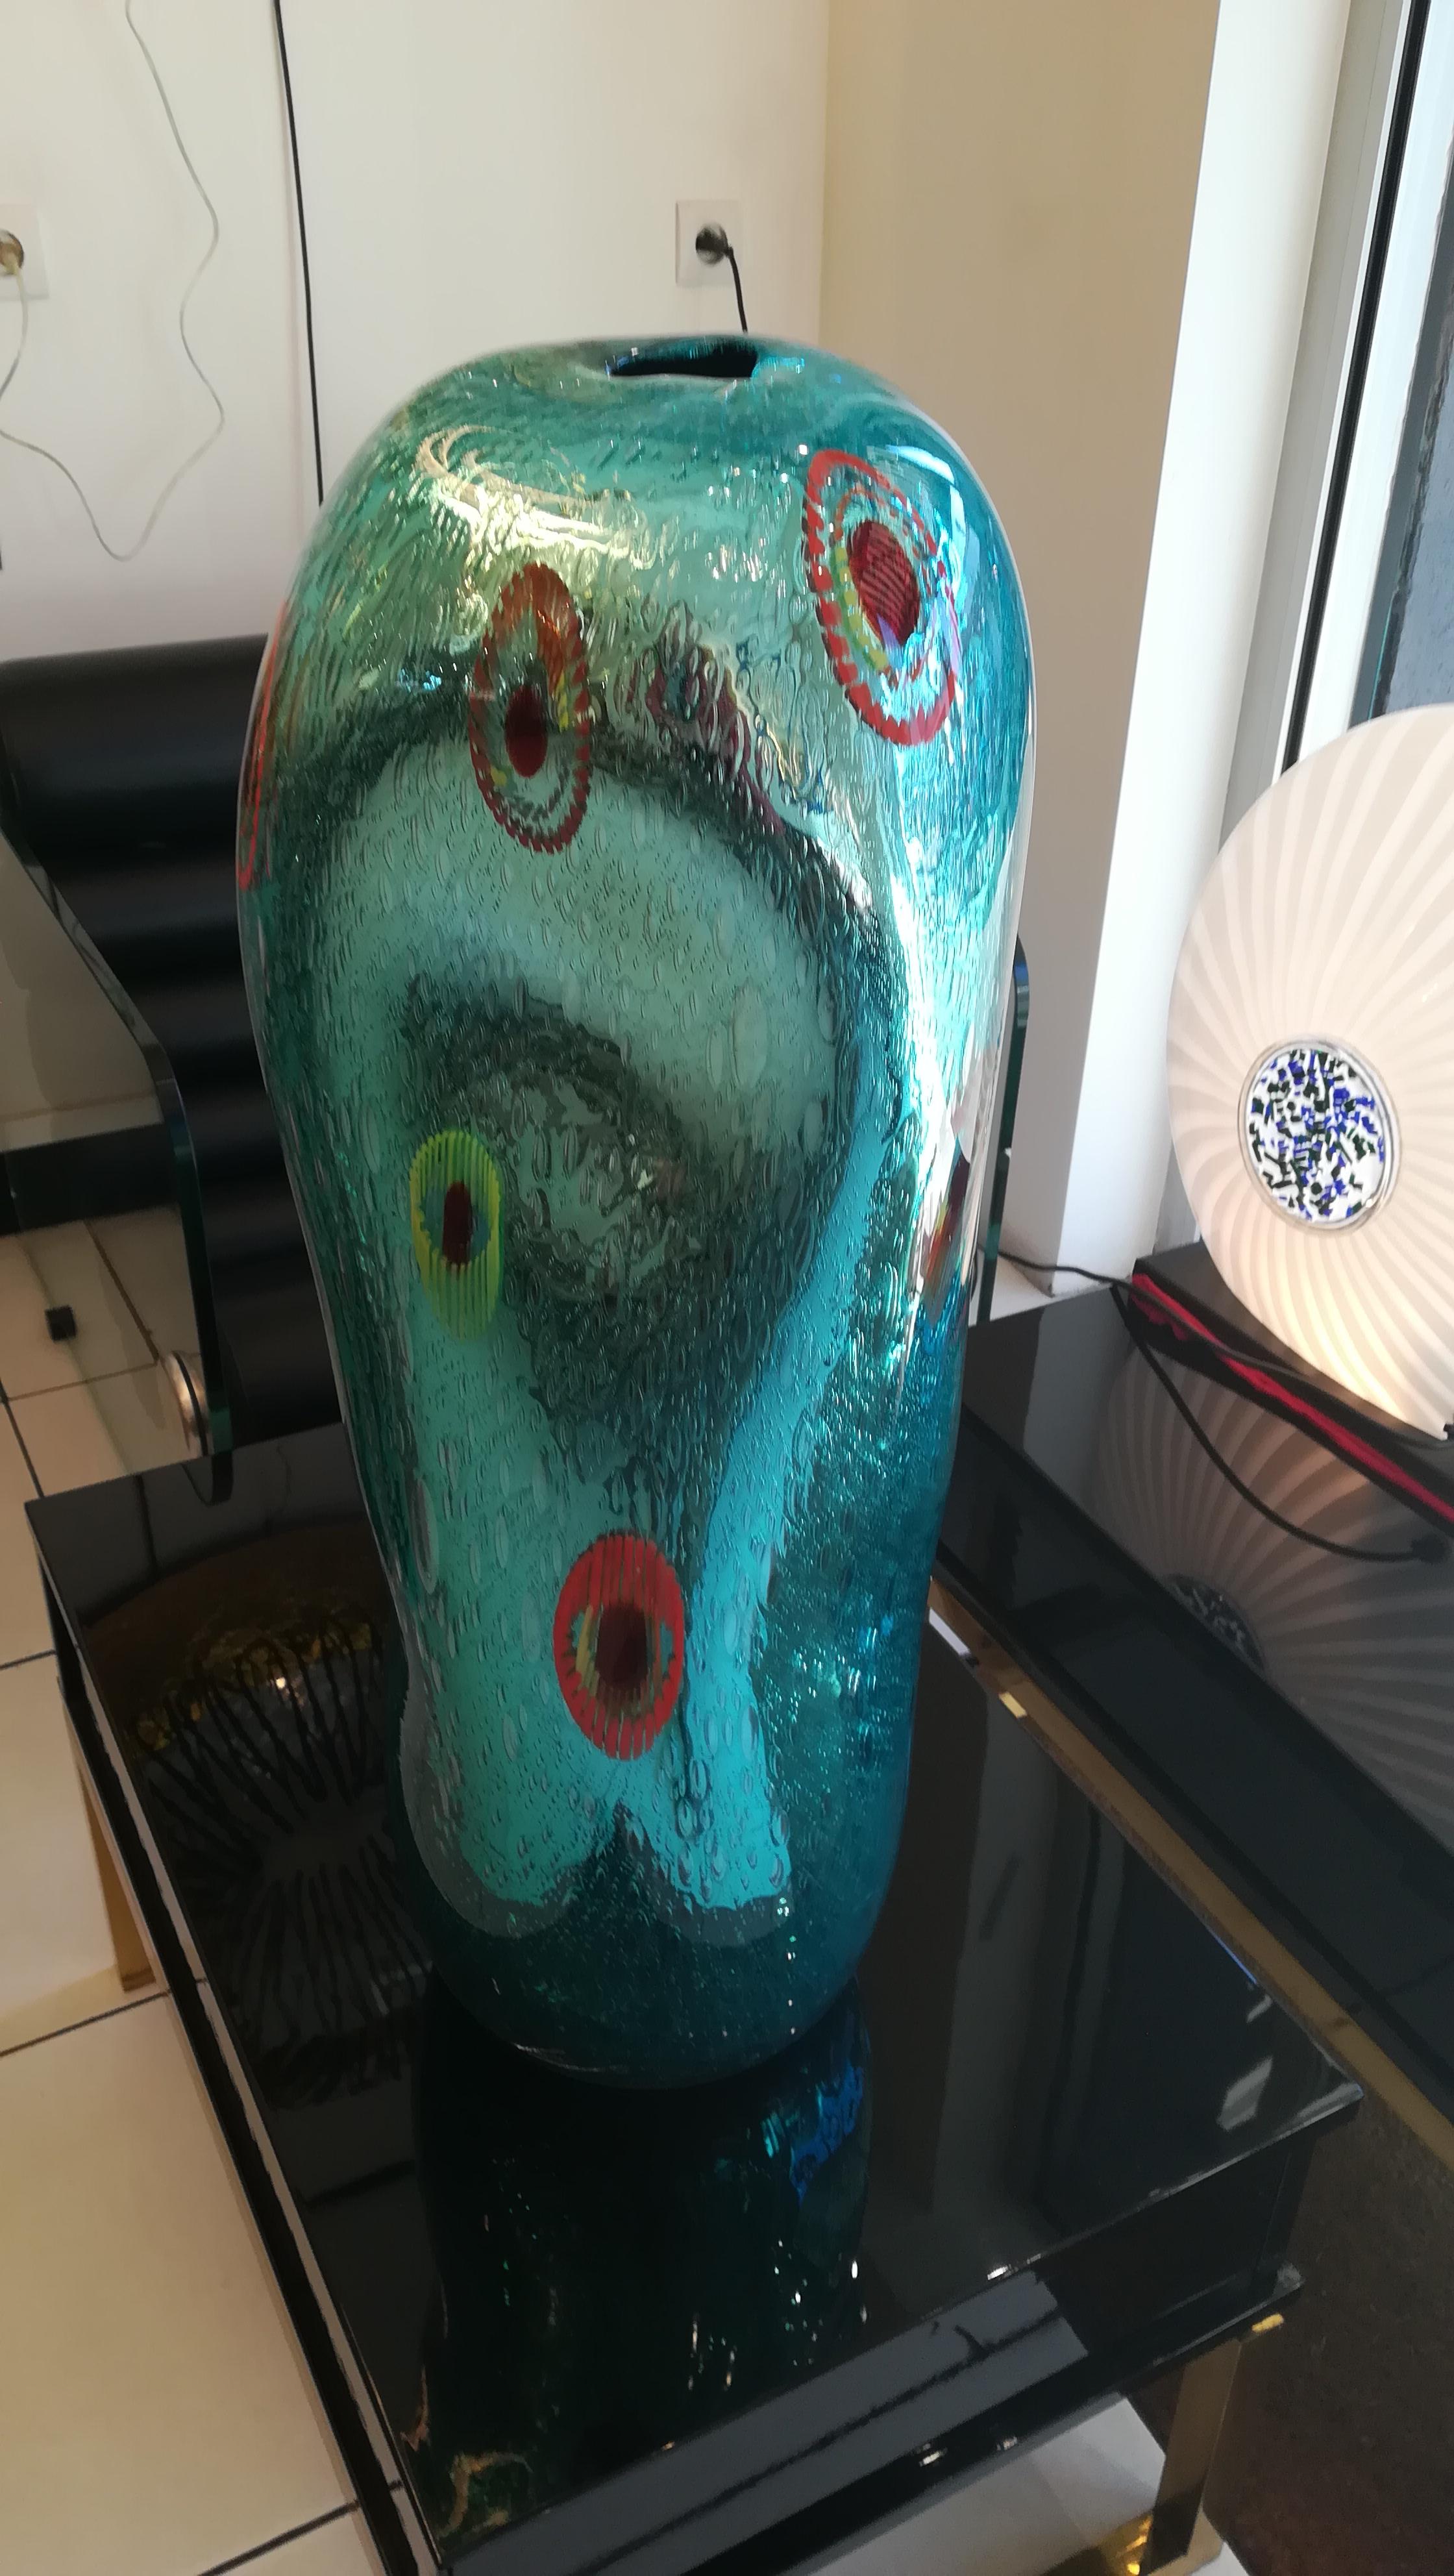 The vase is signed, one-off, in perfect condition, blue Murano glass, free-form, with red murrines inclusions.